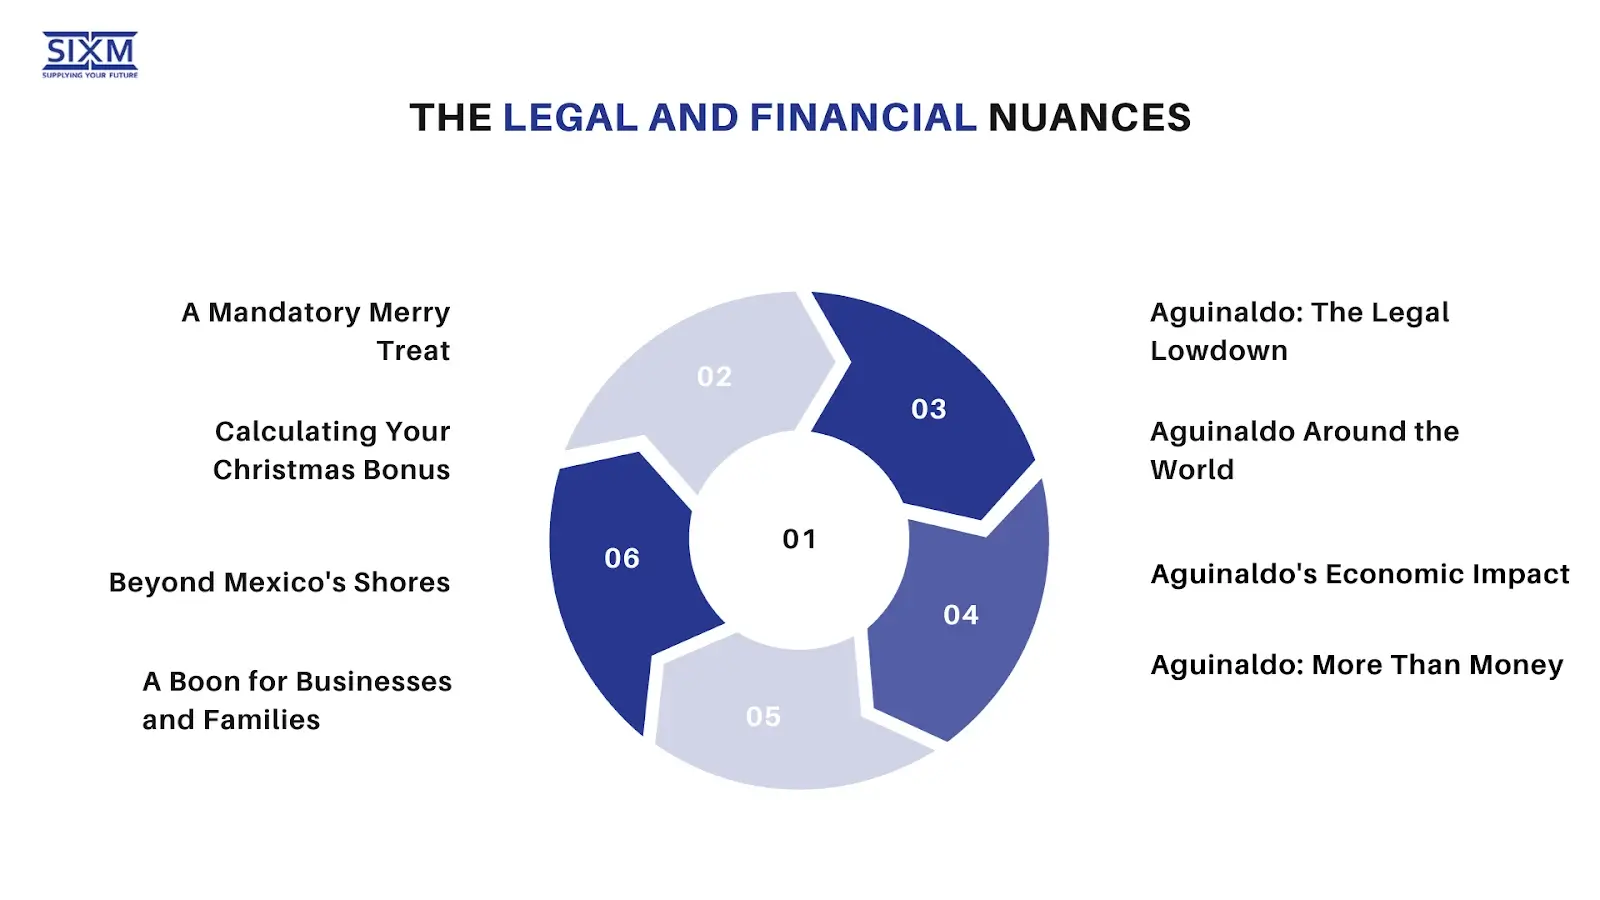 Image About Legal and Financial Nuances